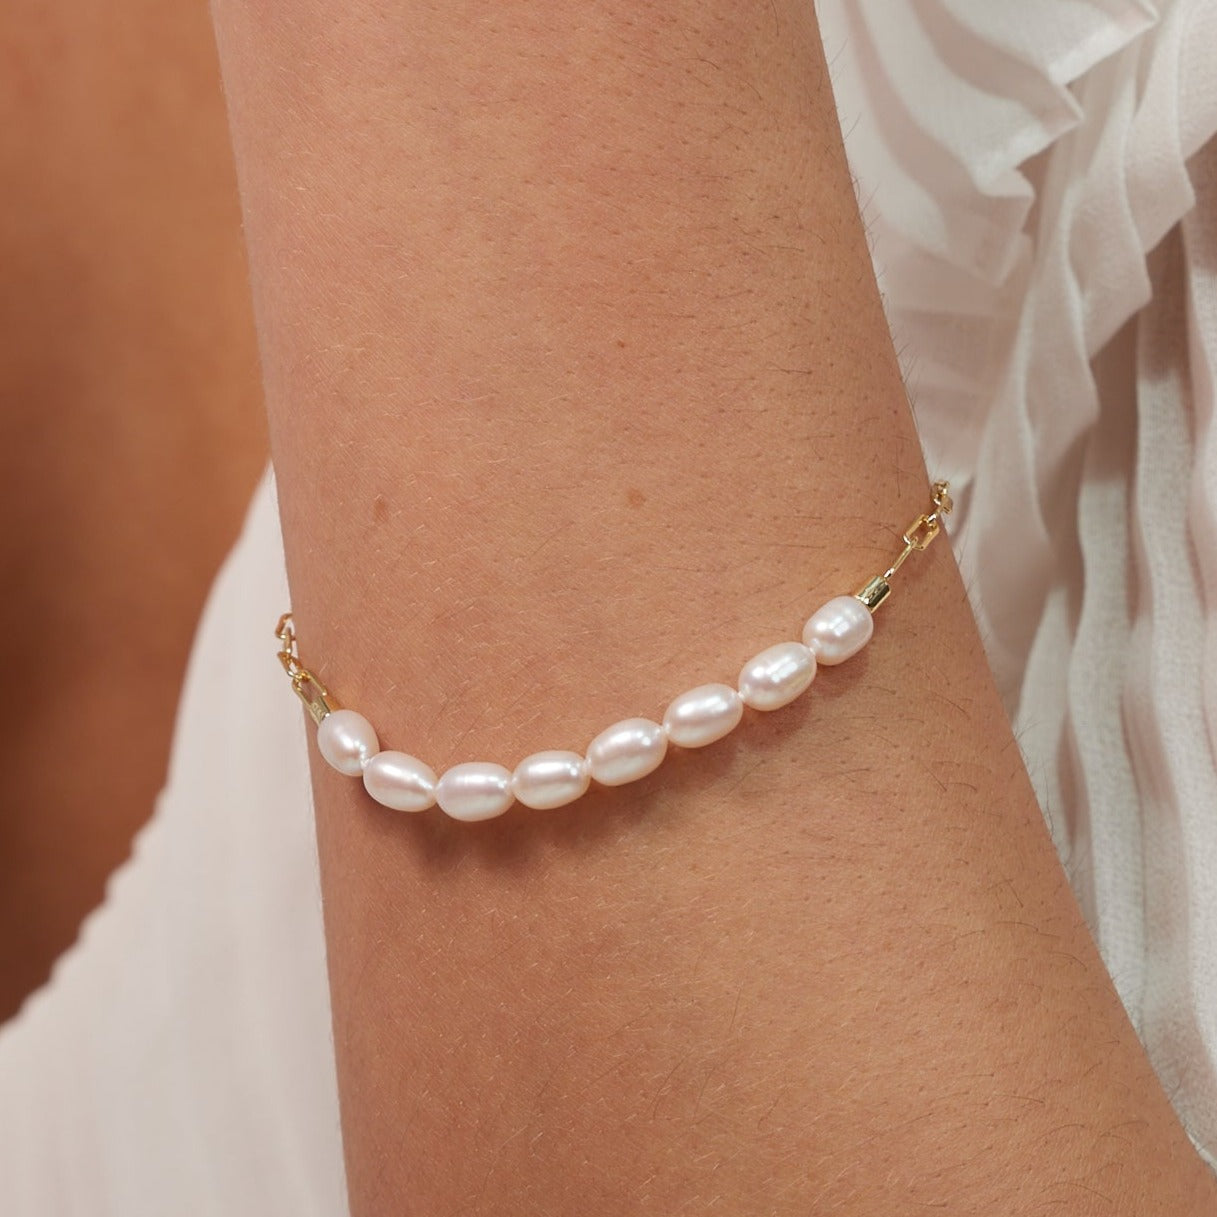 Credo gold link chain bracelet with cultured freshwater pearls